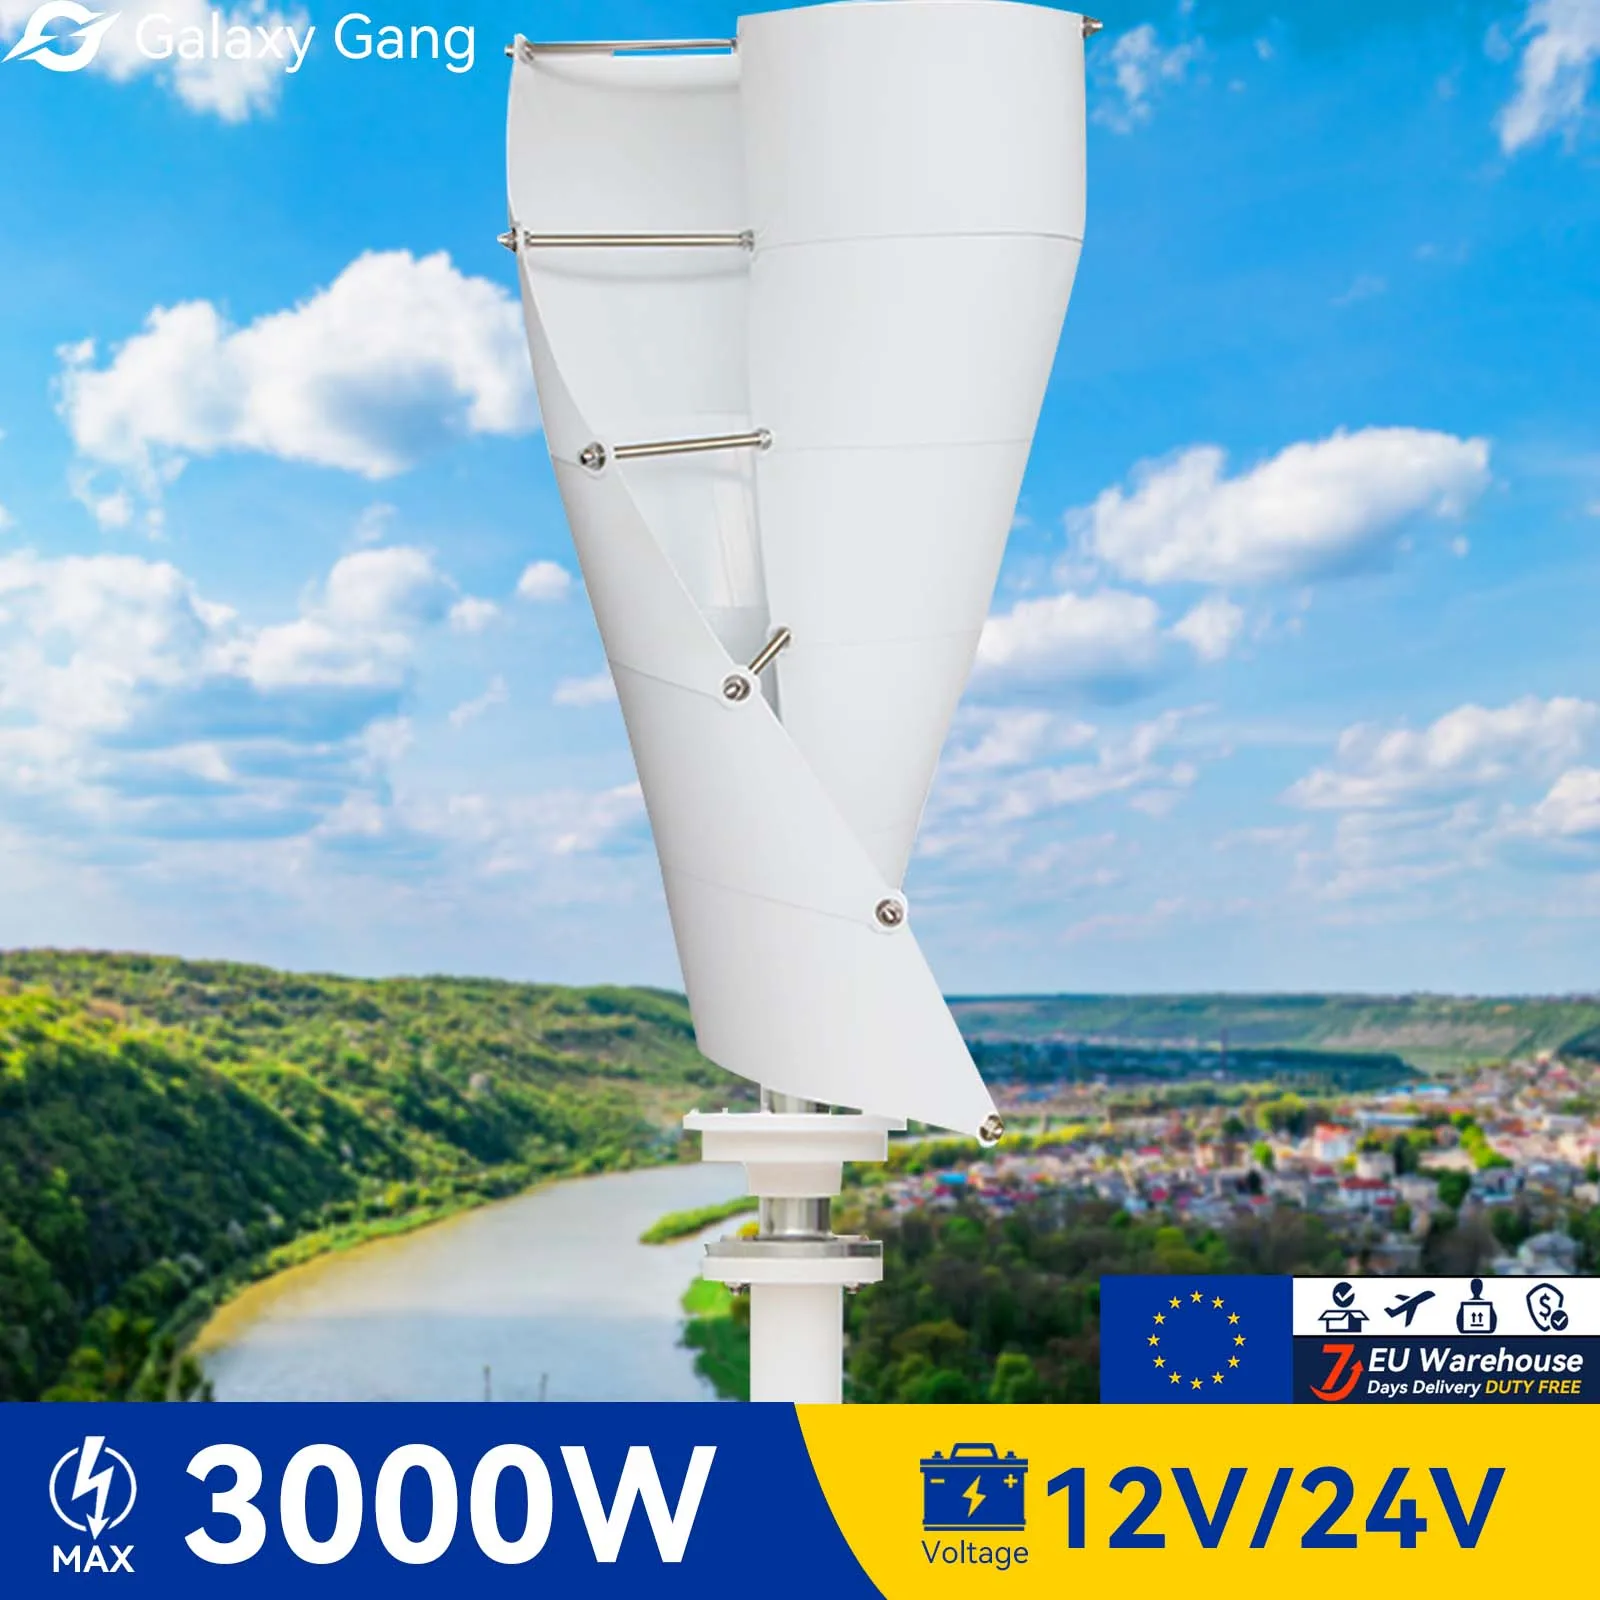 

Galaxy Gang Vertical Wind Turbine Generator 3000W 3kw 12v 24v 48v Windmills With MPPT Hybrid Controller For Home Use